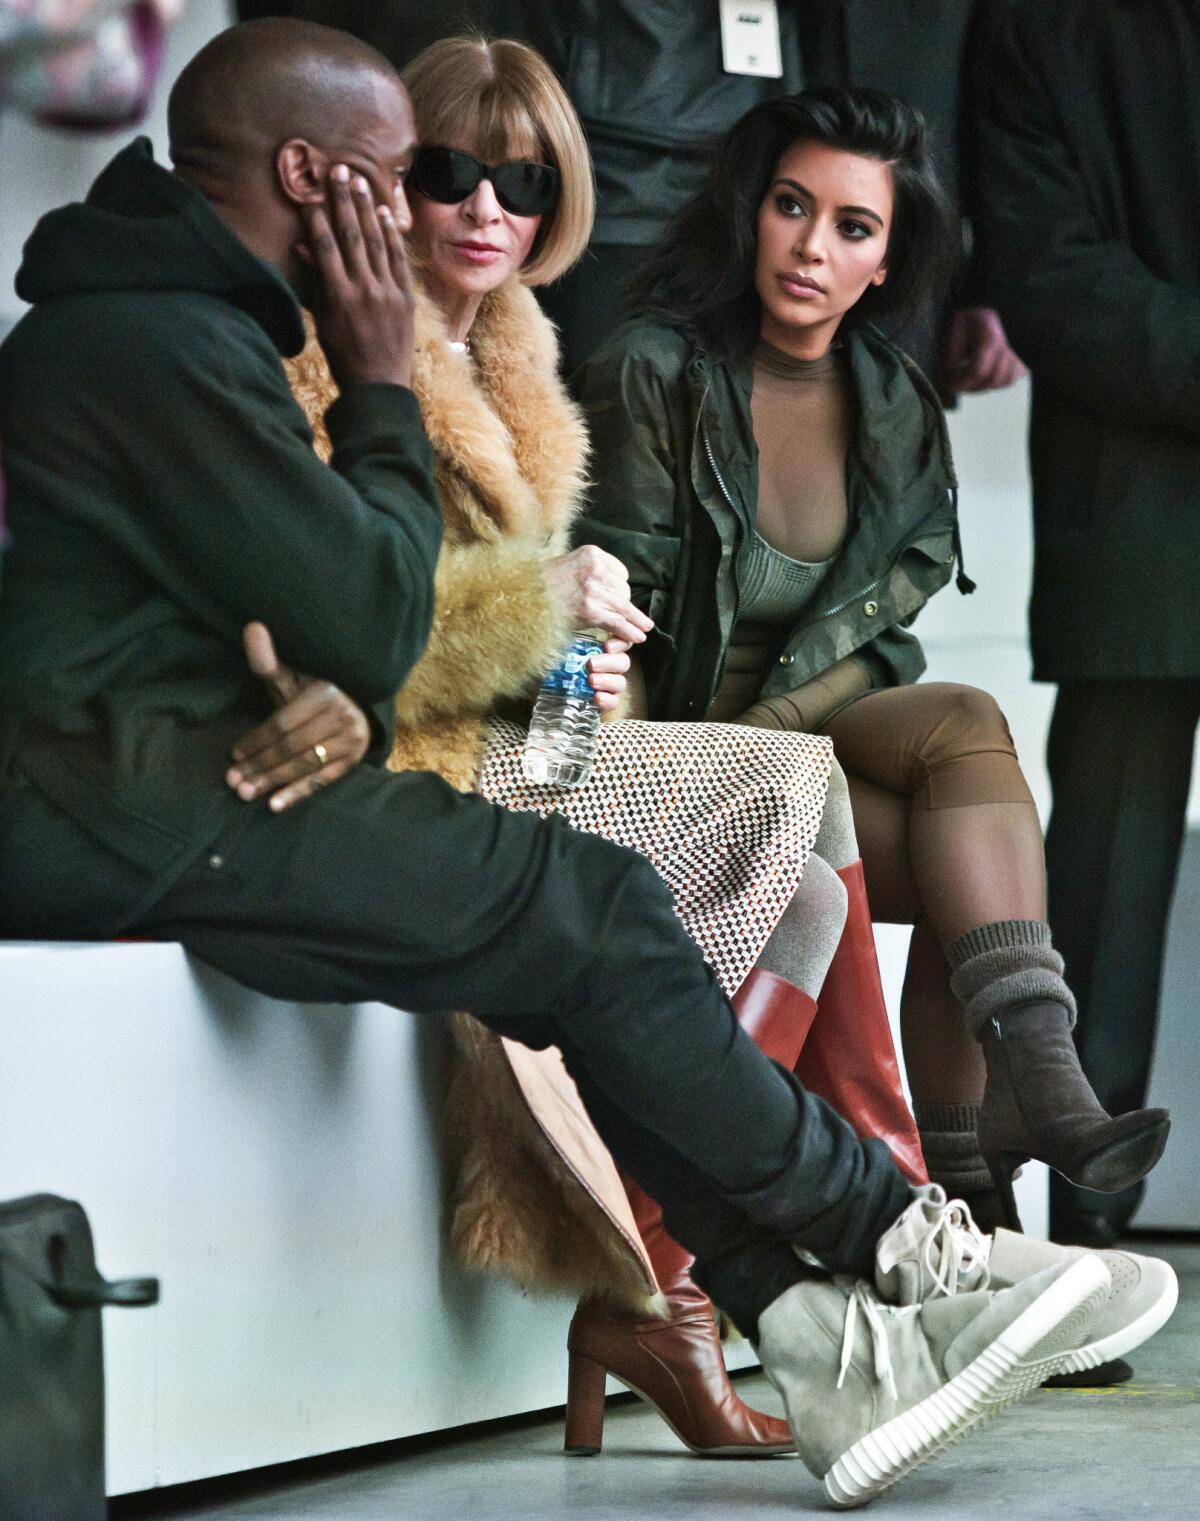 Showing off his Yeezy Boosts: Kanye West, from left, Vogue editor Anna Wintour, and Kim Kardashian before the showing of West's new shoe line during Fashion Week in New York. (AP Photo/Bebeto Matthews)